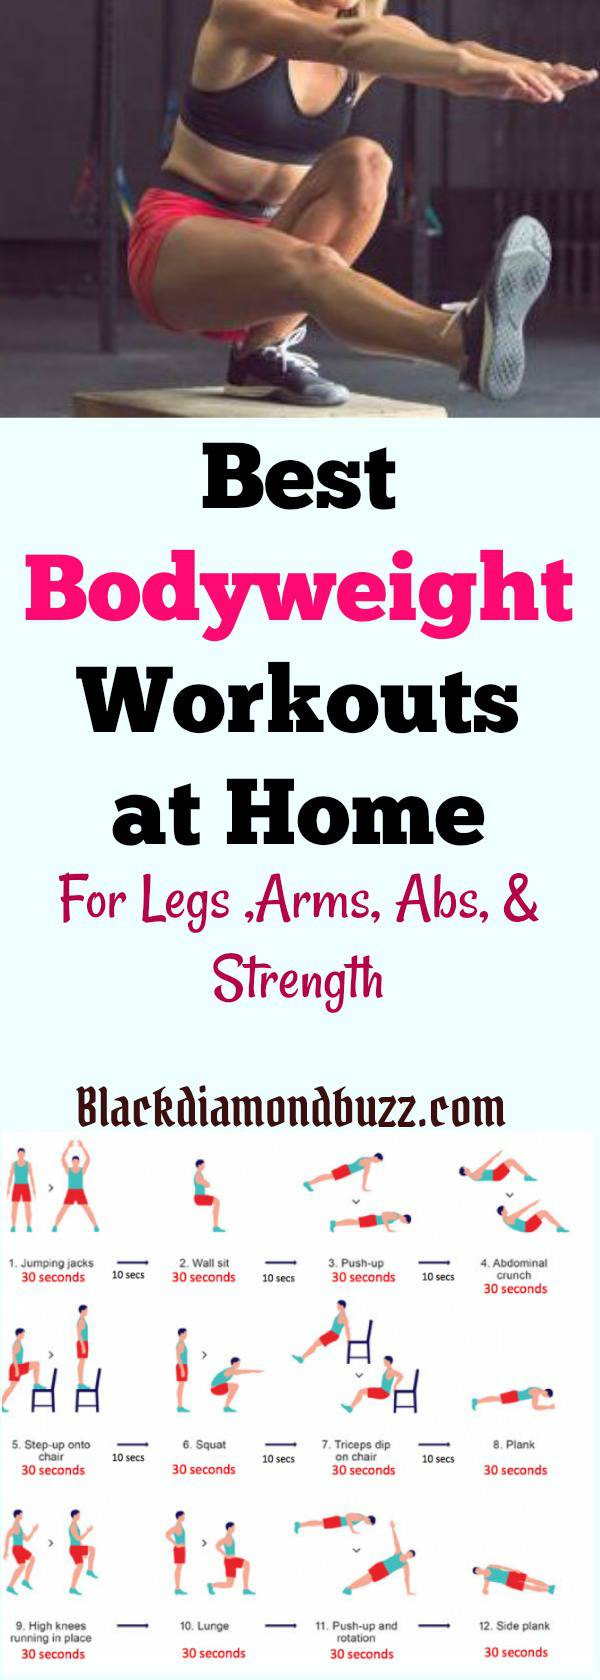 Weight Loss Exercises At Home Weightloss
 7 Best Bodyweight Exercises for Weight Loss at Home For